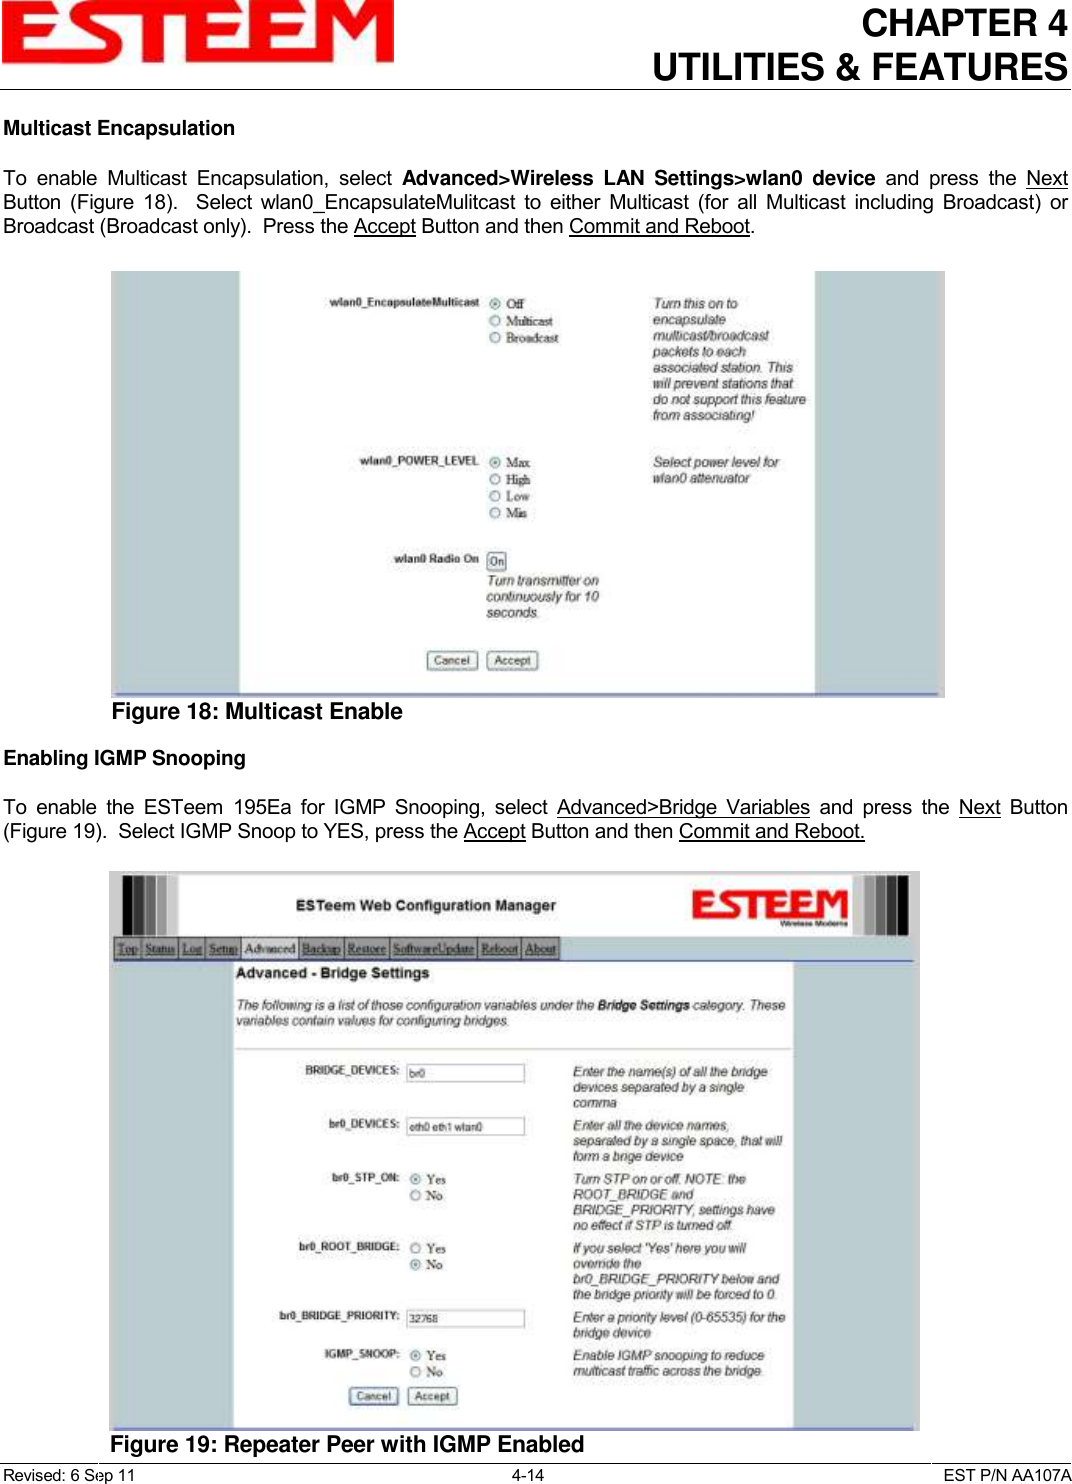 CHAPTER 4   UTILITIES &amp; FEATURES  Revised: 6 Sep 11  4-14  EST P/N AA107A Multicast Encapsulation  To  enable  Multicast  Encapsulation,  select  Advanced&gt;Wireless  LAN  Settings&gt;wlan0  device  and  press  the  Next Button  (Figure  18).    Select  wlan0_EncapsulateMulitcast  to  either  Multicast  (for  all  Multicast  including  Broadcast)  or Broadcast (Broadcast only).  Press the Accept Button and then Commit and Reboot.   Enabling IGMP Snooping  To  enable  the  ESTeem  195Ea  for  IGMP  Snooping,  select  Advanced&gt;Bridge  Variables and  press  the  Next  Button (Figure 19).  Select IGMP Snoop to YES, press the Accept Button and then Commit and Reboot.  Figure 18: Multicast Enable  Figure 19: Repeater Peer with IGMP Enabled  